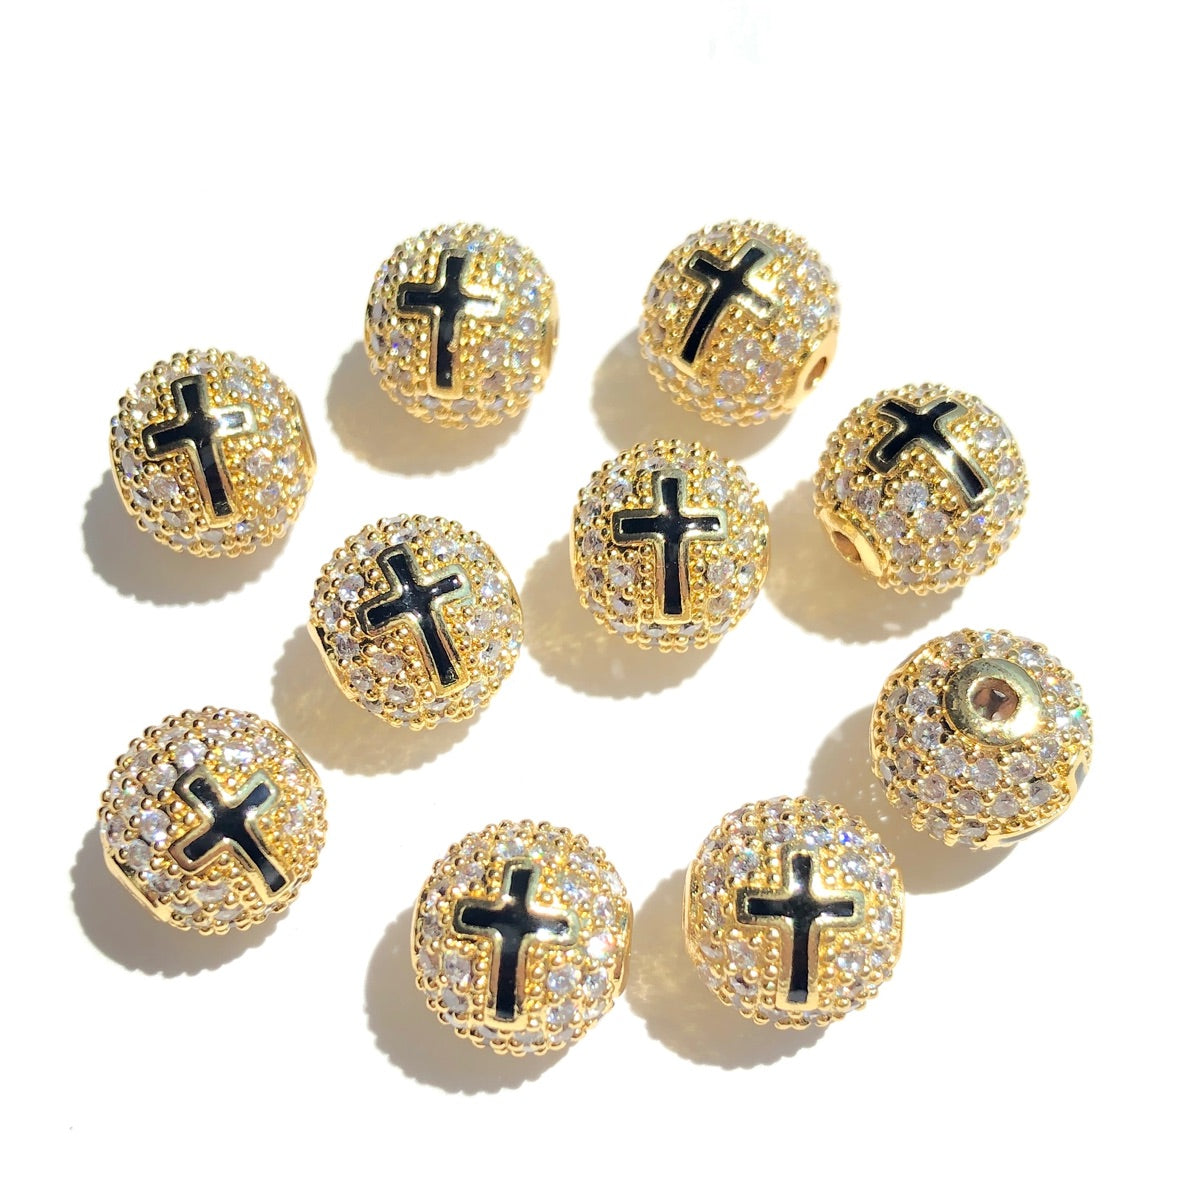 10-20pcs/lot 10mm CZ Paved Cross Ball Spacers Beads Gold CZ Paved Spacers 10mm Beads Ball Beads New Spacers Arrivals Charms Beads Beyond